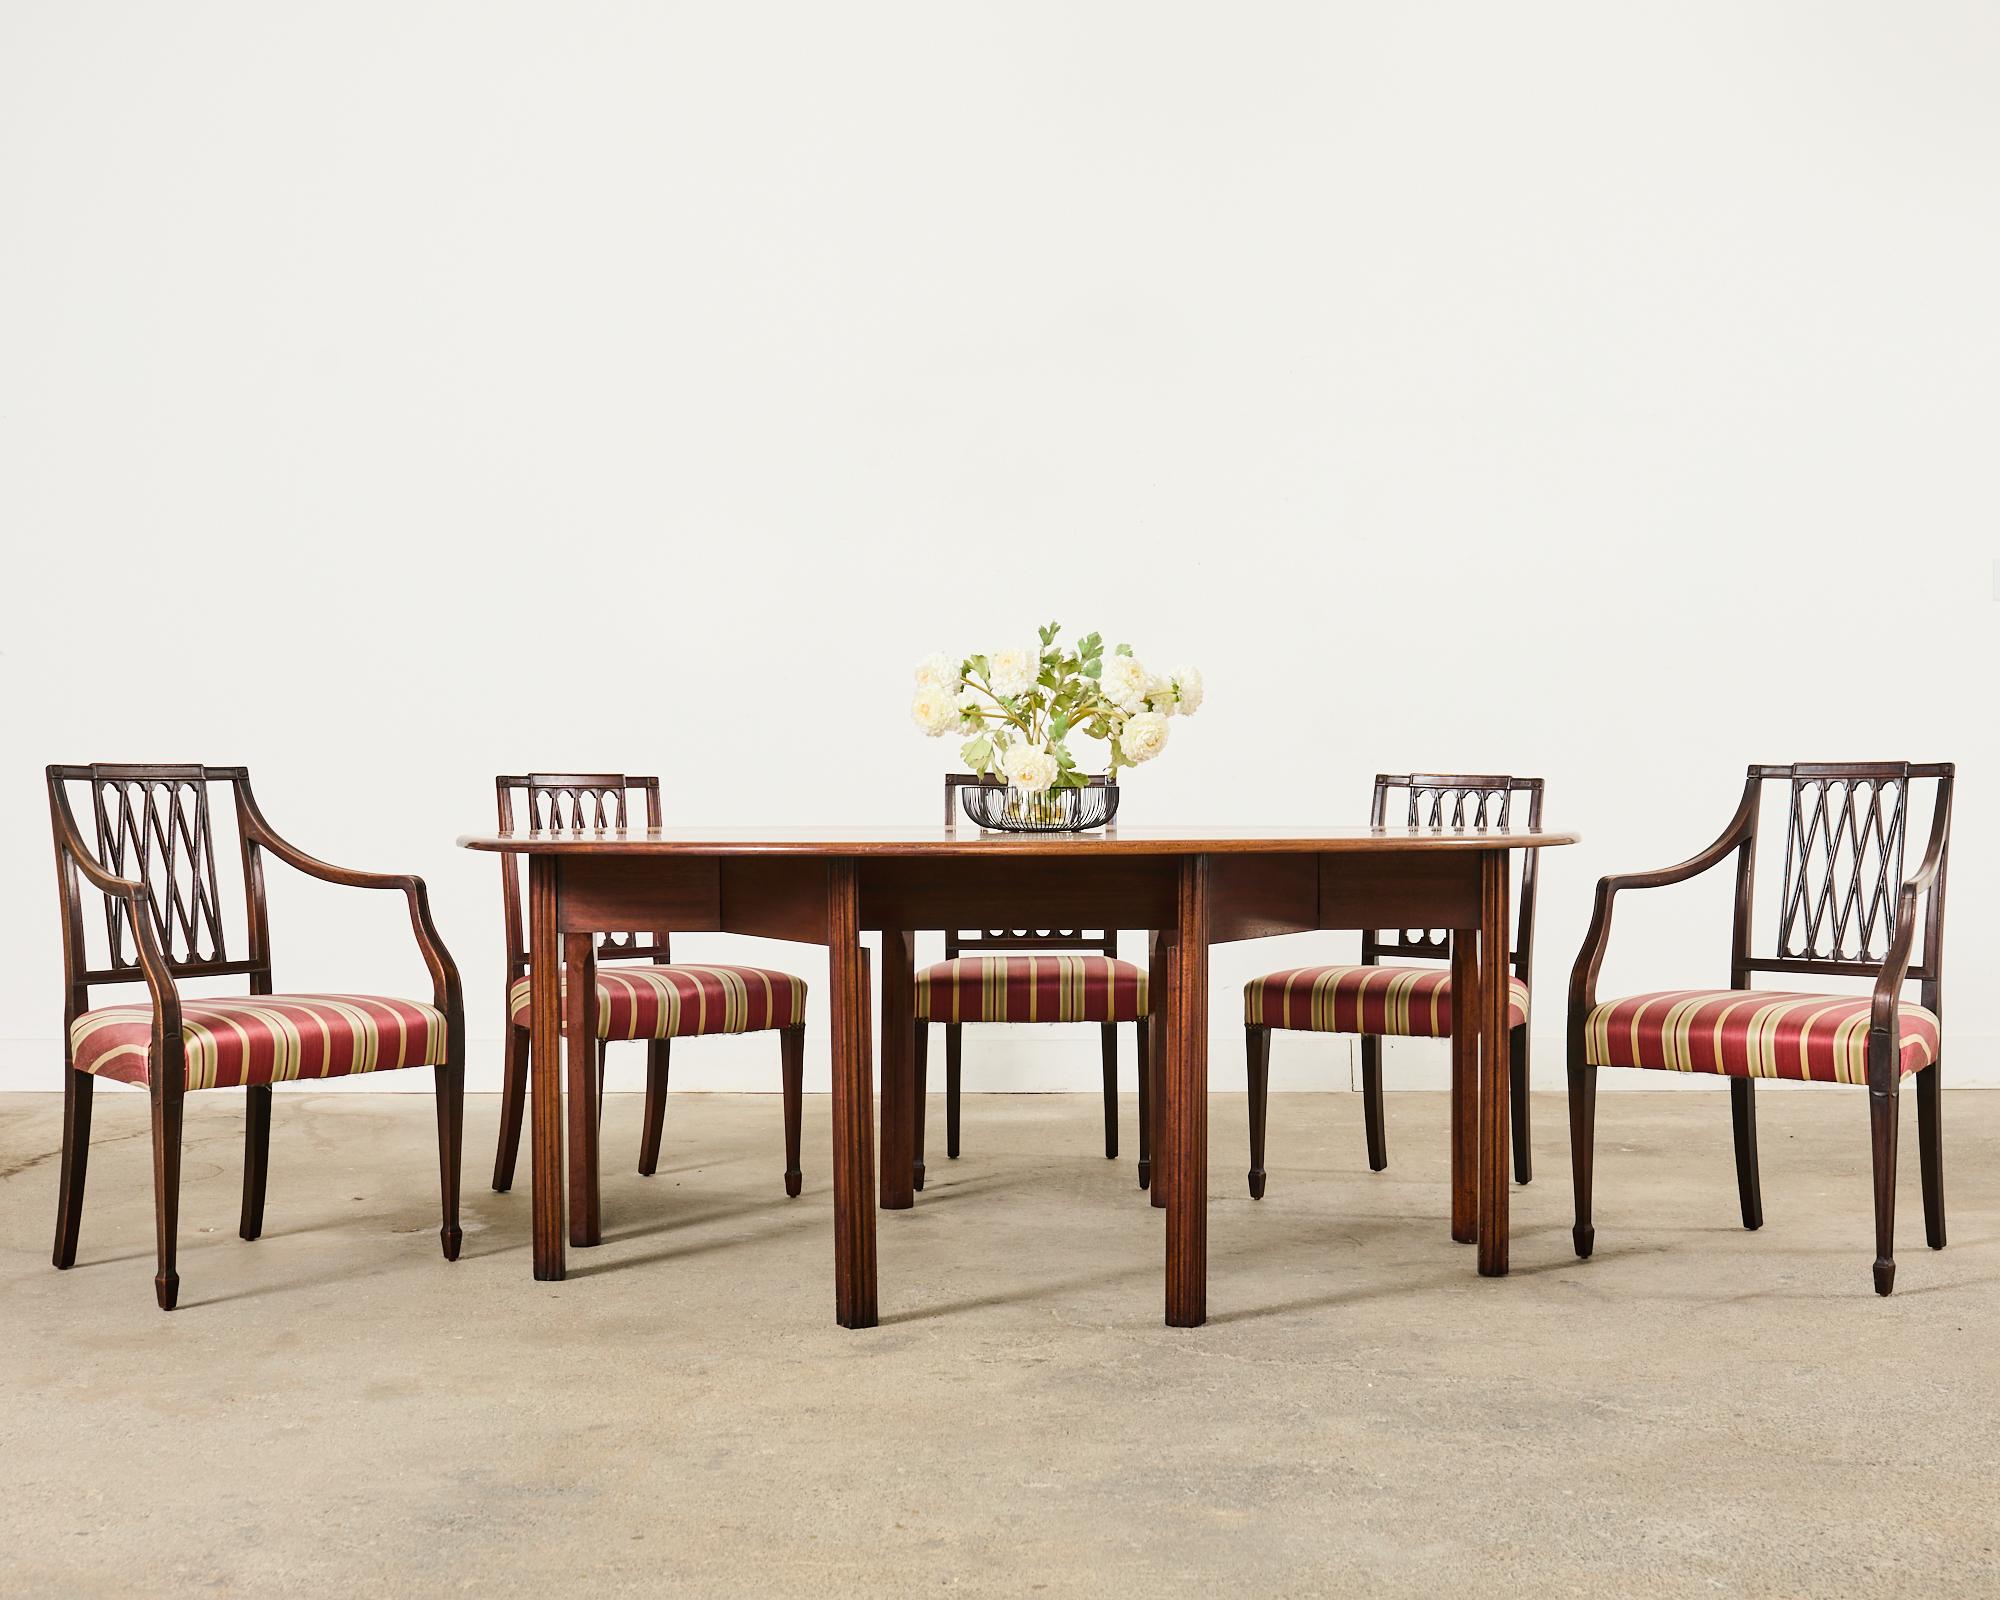 Distinctive set of ten mahogany dining chairs consisting of eight side chairs and two host armchairs measuring 24 inches wide and 21.5 inches deep. Crafted in the English Regency taste featuring a square back with a neoclassical style ribbon lattice